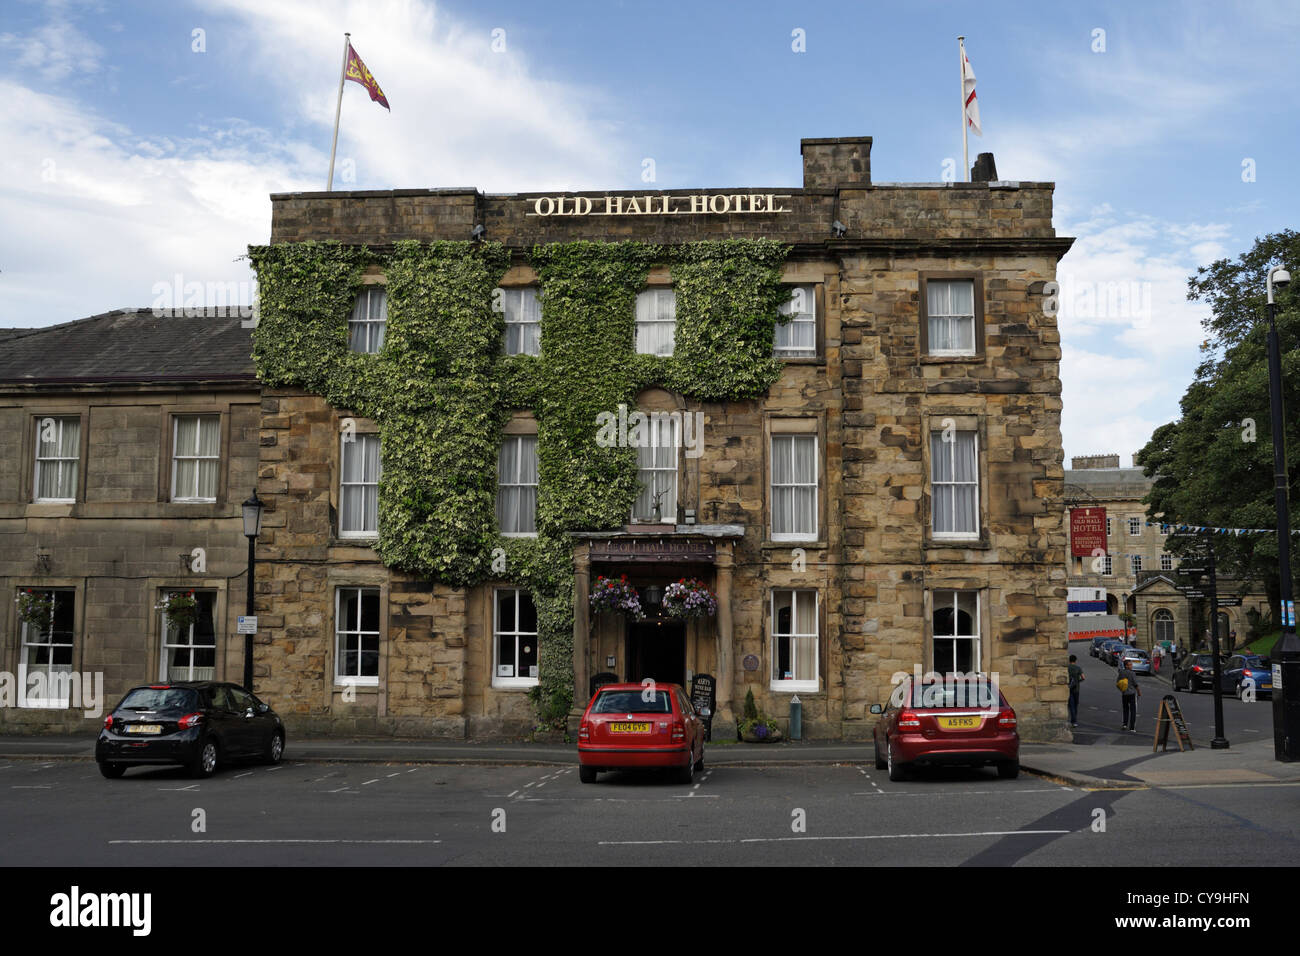 The Old Hall Hotel in Buxton, Derbyshire England UK, listed building, historic architecture Stock Photo